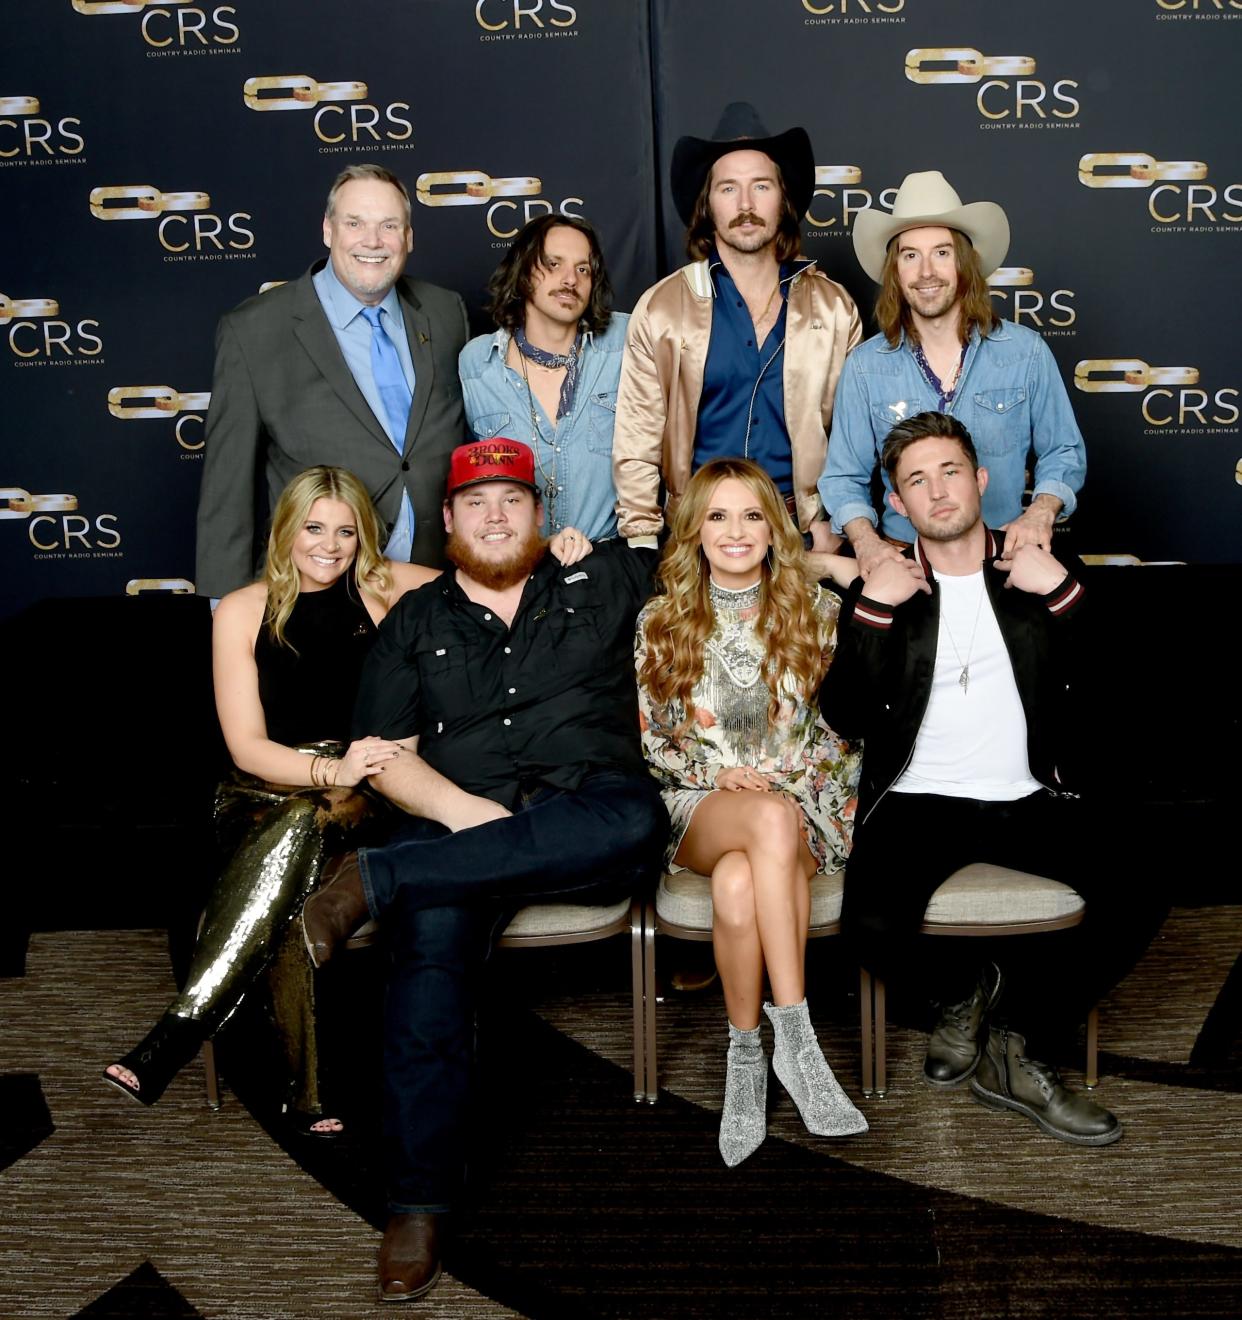 Country Radio Broadcasters, Inc. Executive Director Bill Mayne celebrates with Cameron Duddy, Mark Wystrach and Jess Carson of Midland, Lauren Alaina, Luke Combs, Carly Pearce and Michael Ray at CRS 2018 on February 7, 2018, in Nashville, Tennessee.